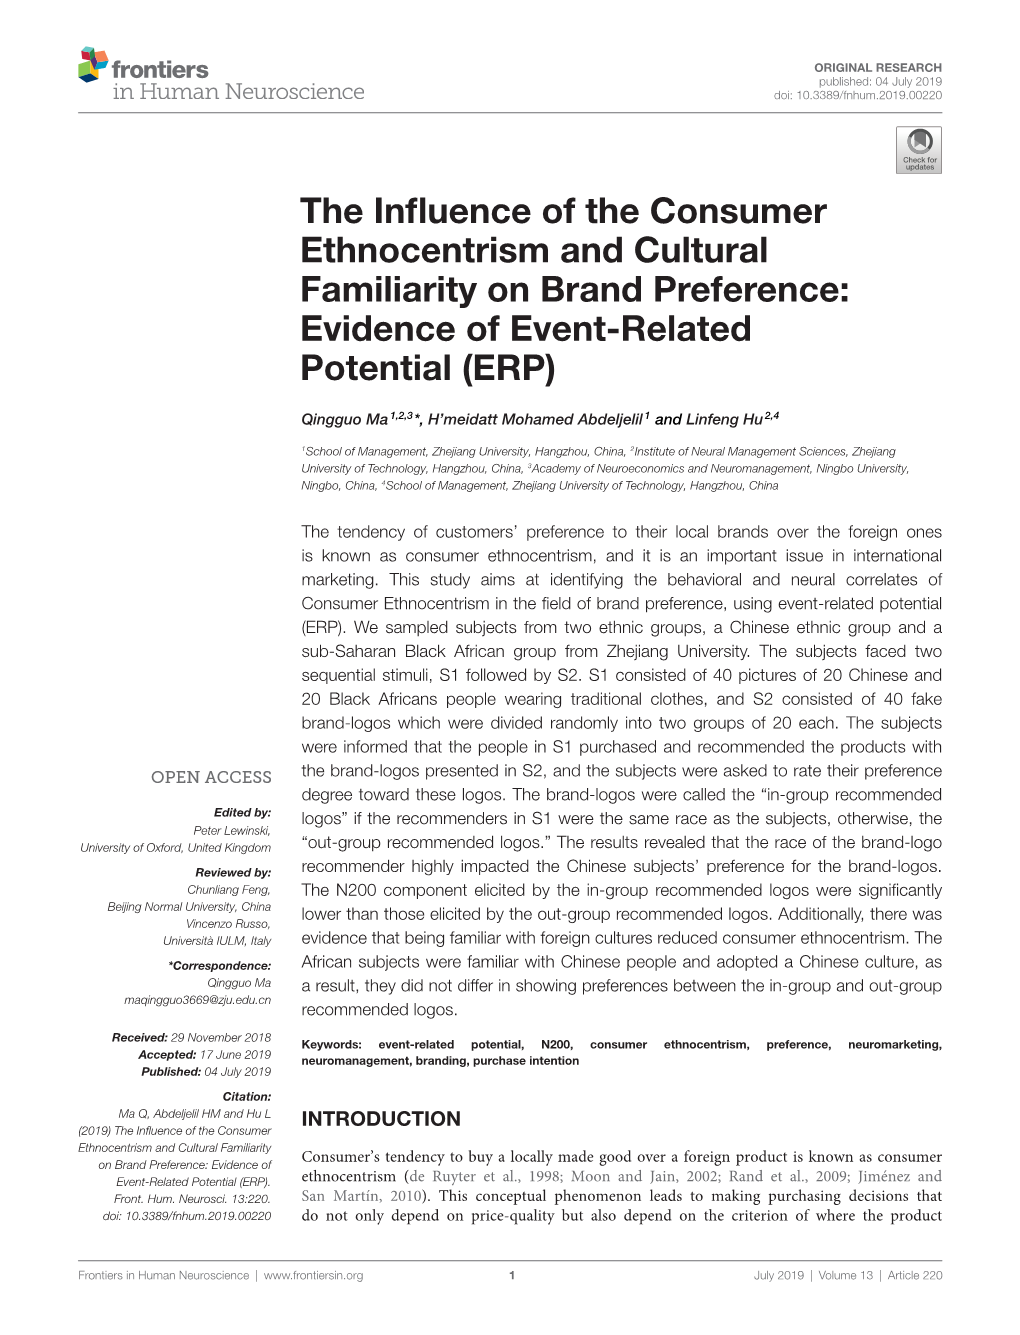 The Influence of the Consumer Ethnocentrism and Cultural